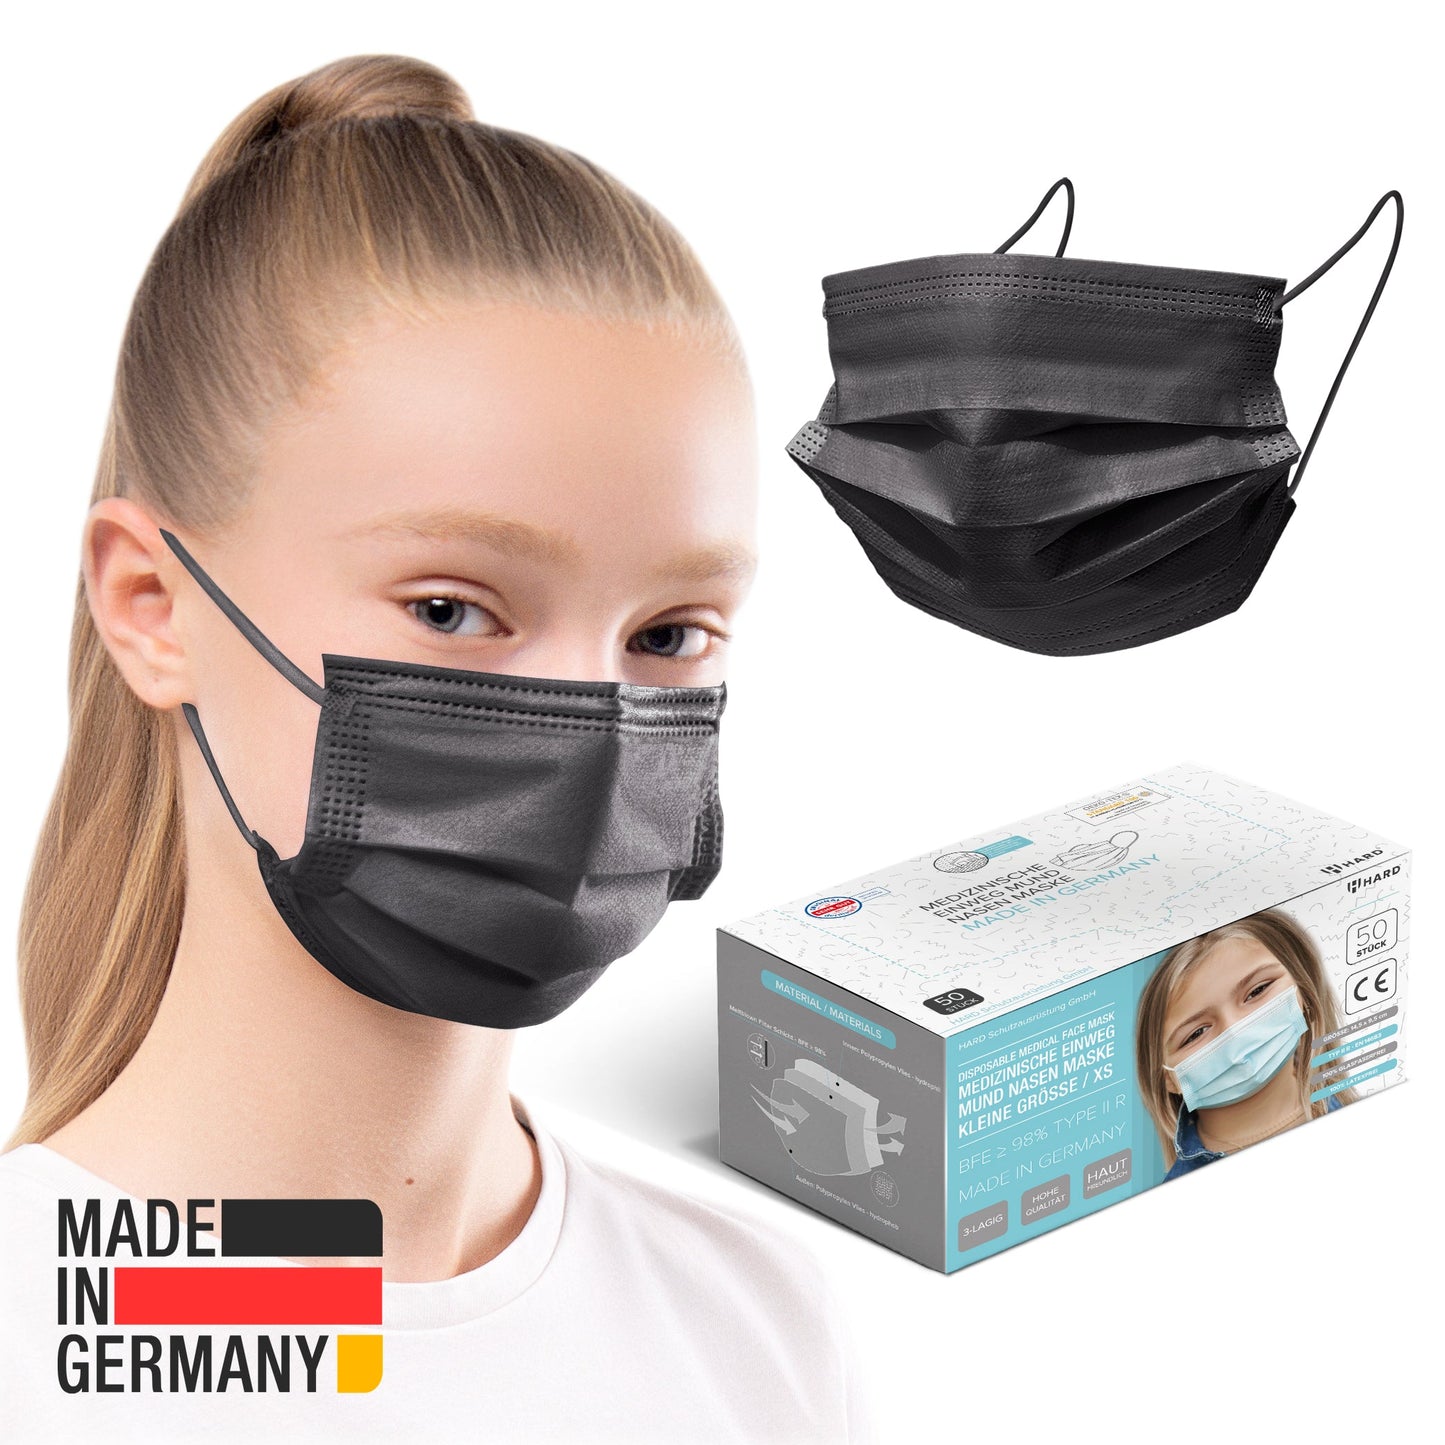 Hard 50x medical mouth protection for children CE certified according to EN14683